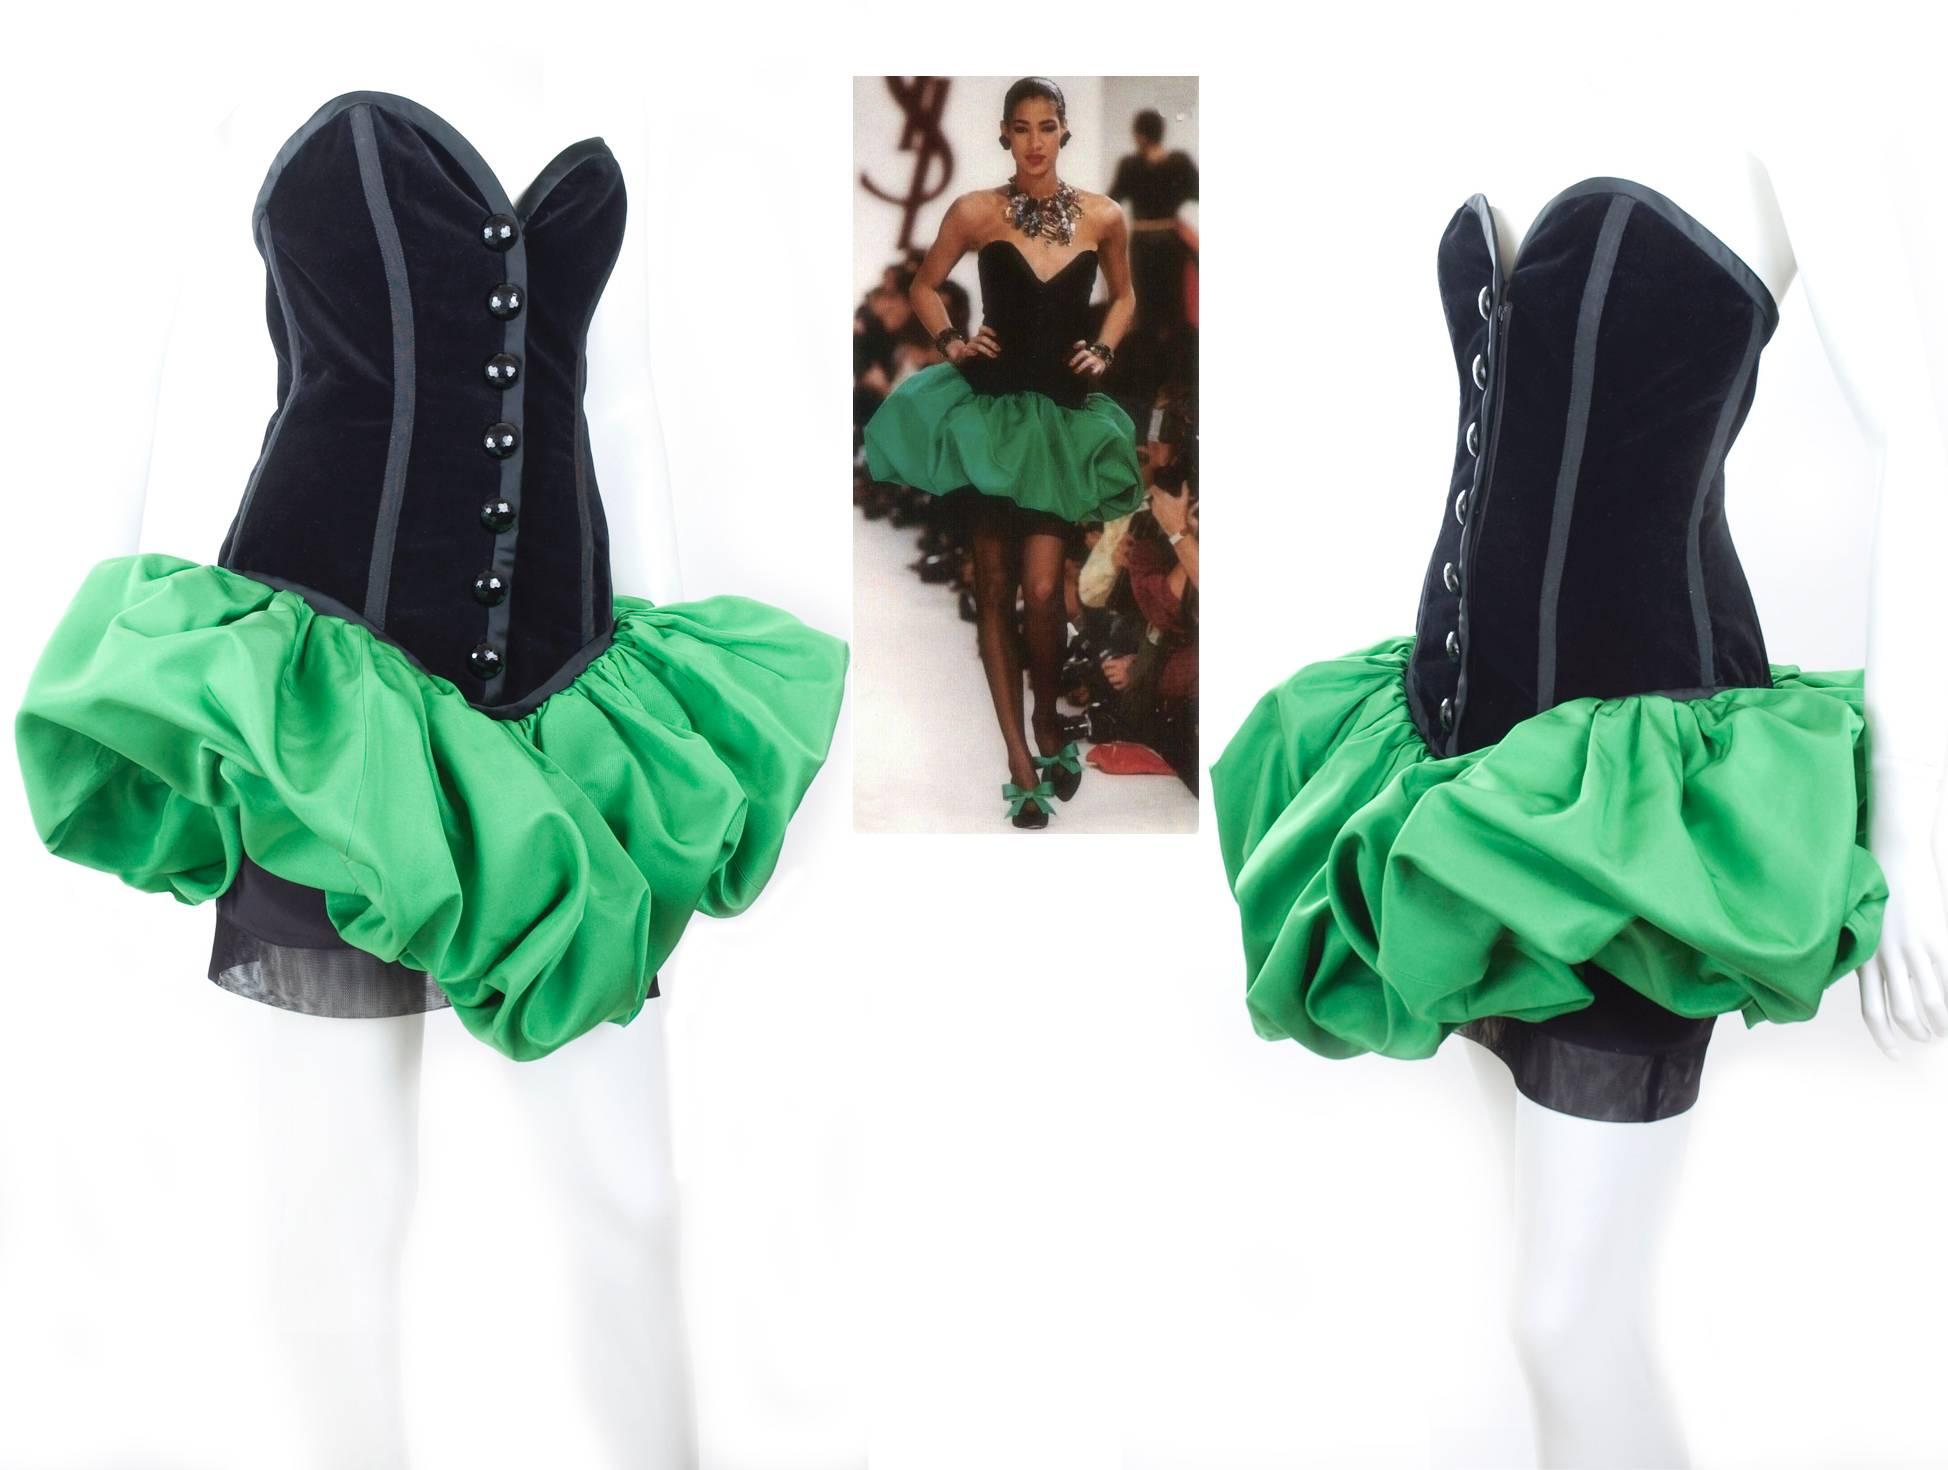 Yves Saint Laurent Bustier Dress with Balloon Skirt.
1986/87 Hiver collection.
Velvet bustier boned and hidden zipper in the front.
Silk ballon skirt in emerald green. It is a bid darker than appears on pics.
Beautiful trim and black glass